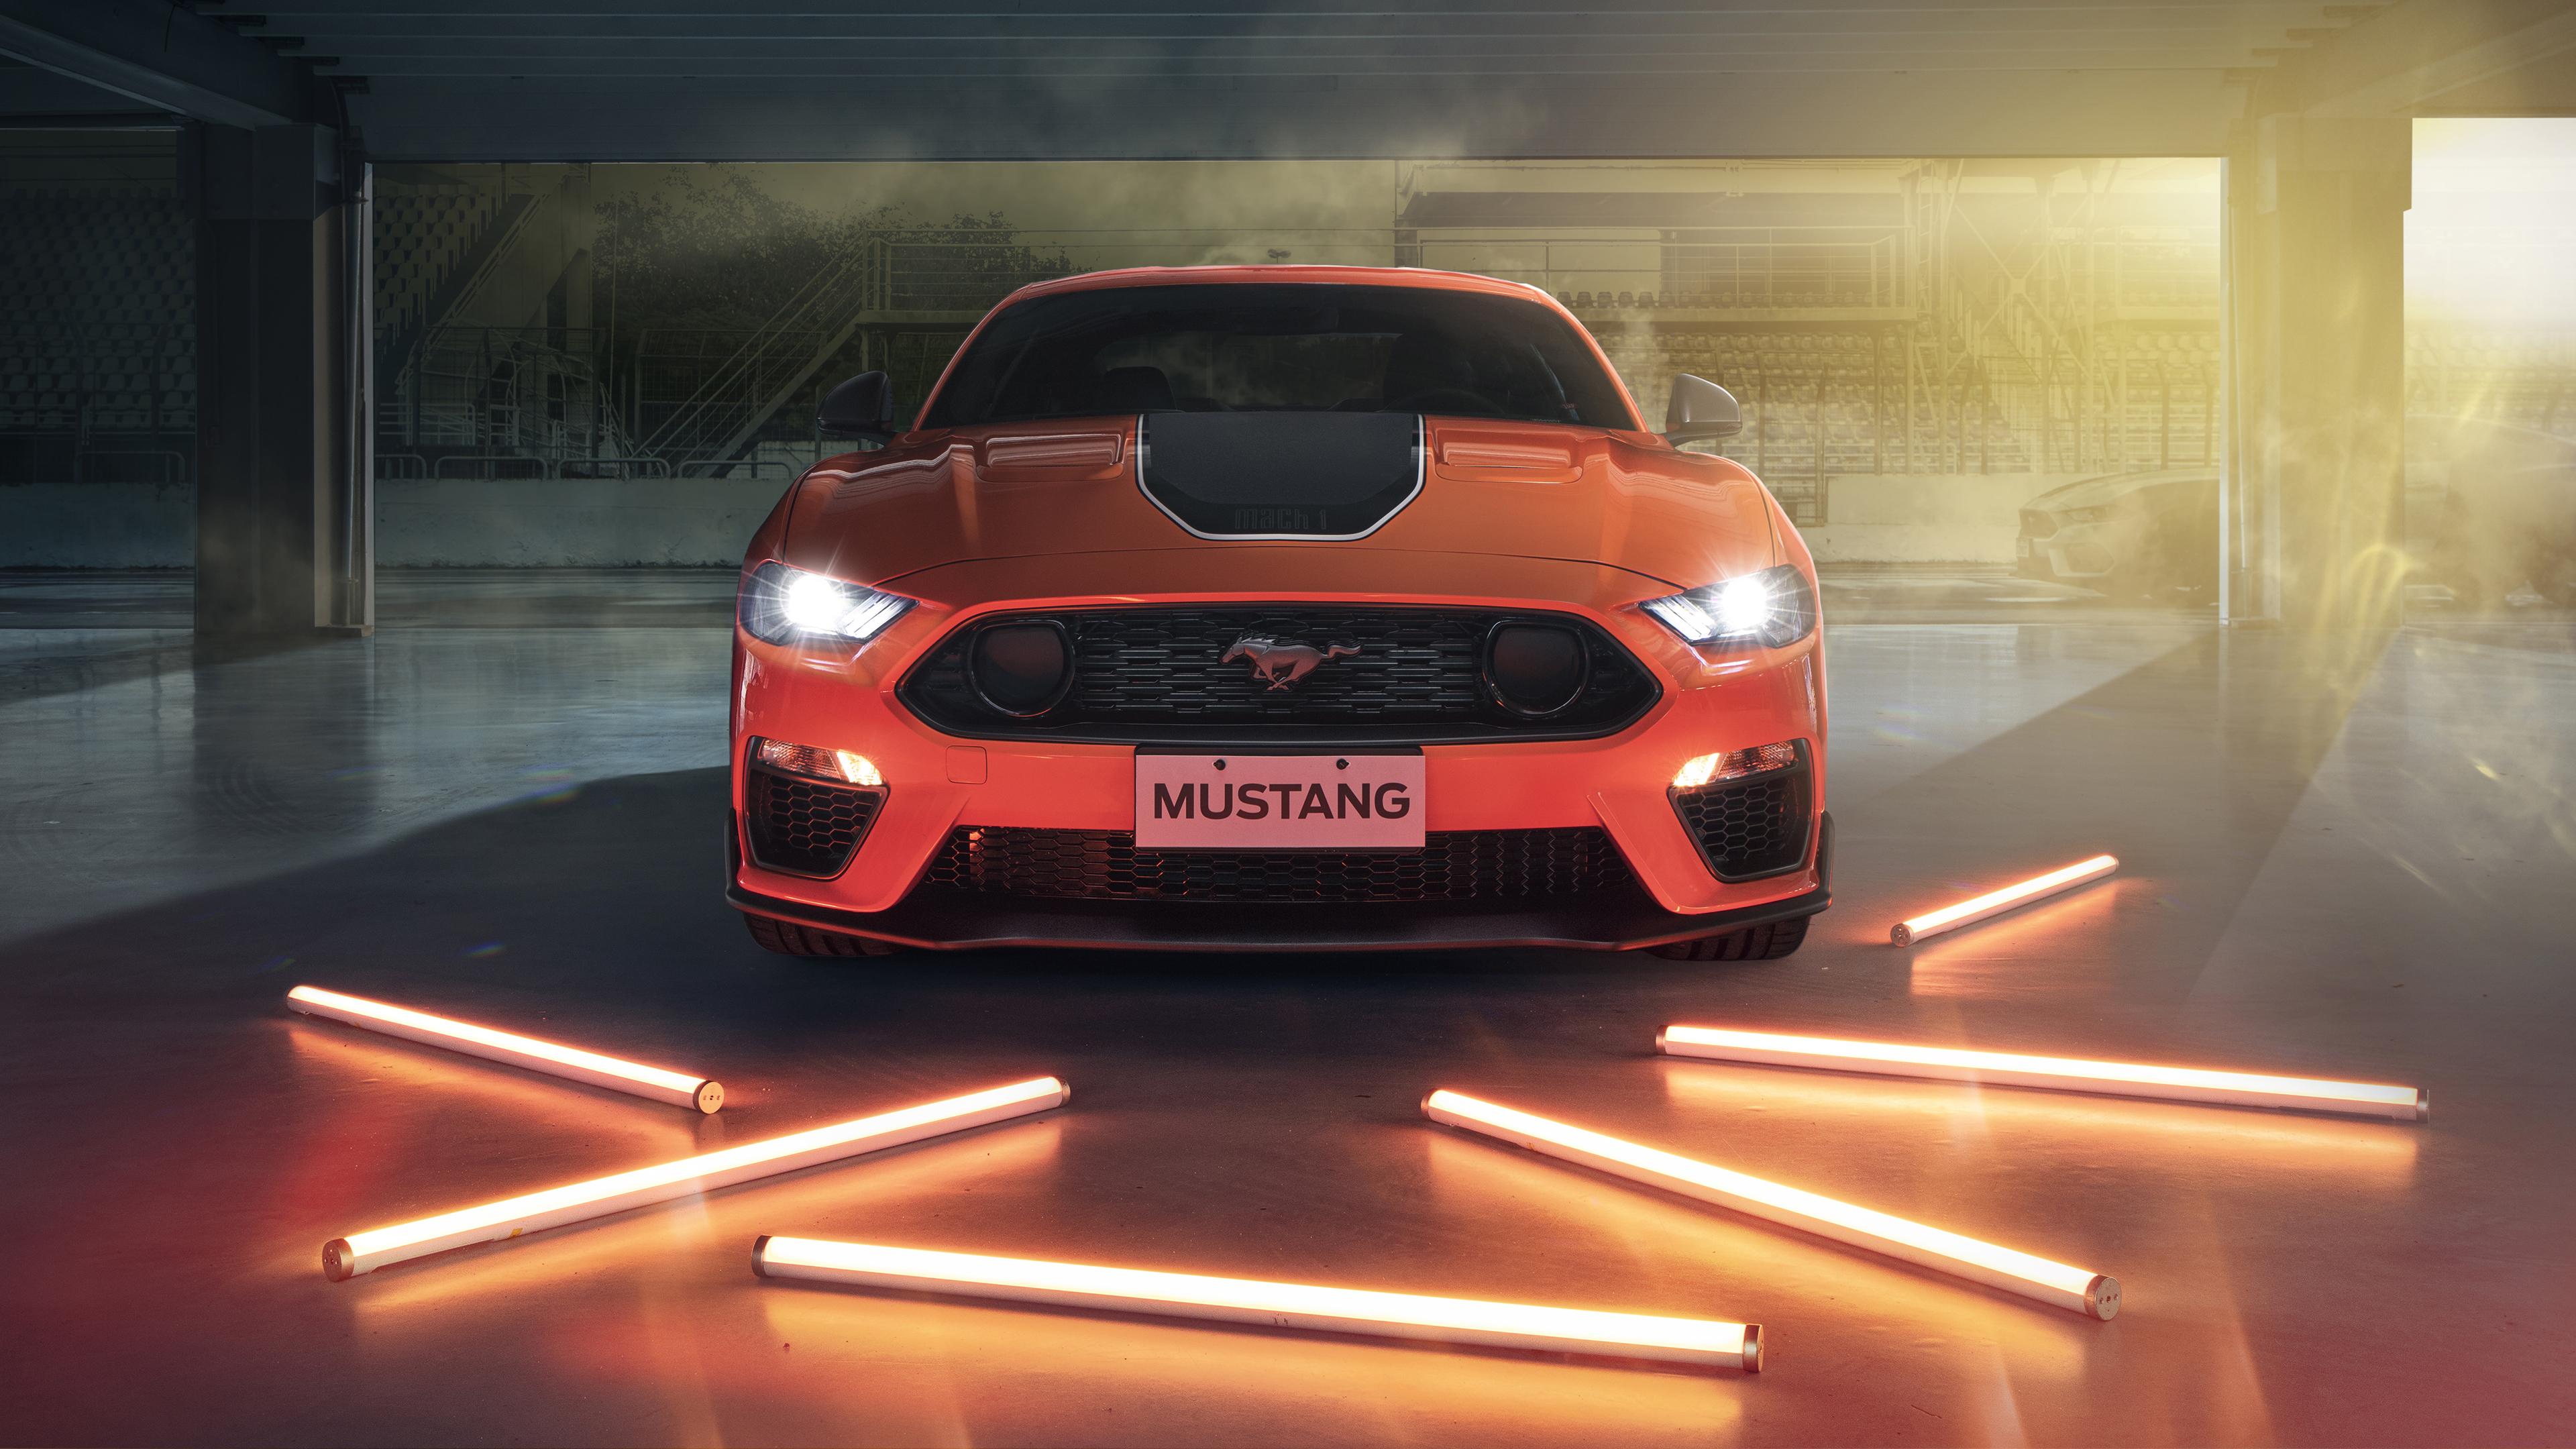 General 3840x2160 Ford Mustang Mach 1 Ford car vehicle muscle cars neon glare frontal view garage race tracks headlight beams Ford Mustang S550